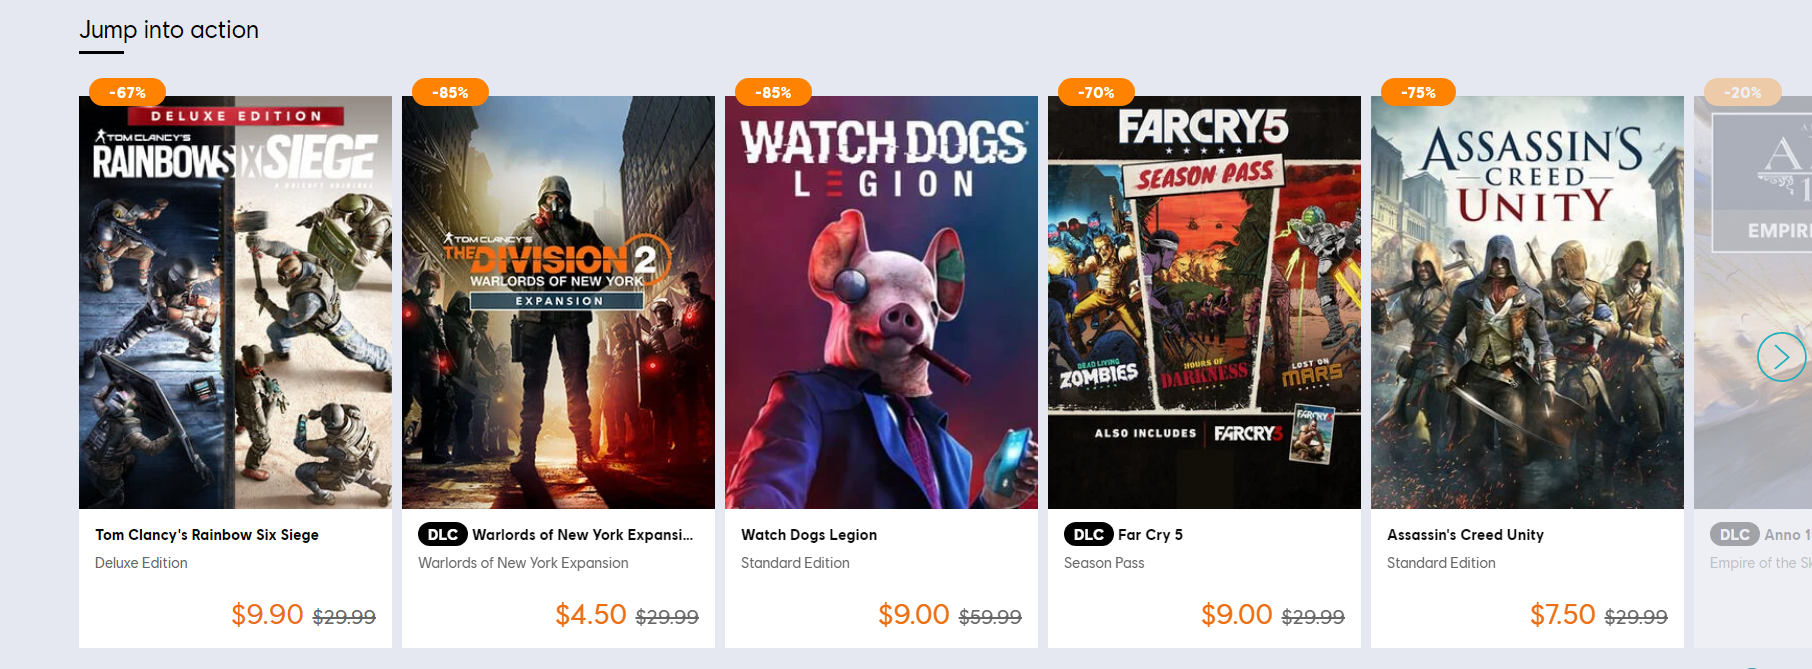 Some of the Major Ubisoft Games Discounted on the Official Storefront